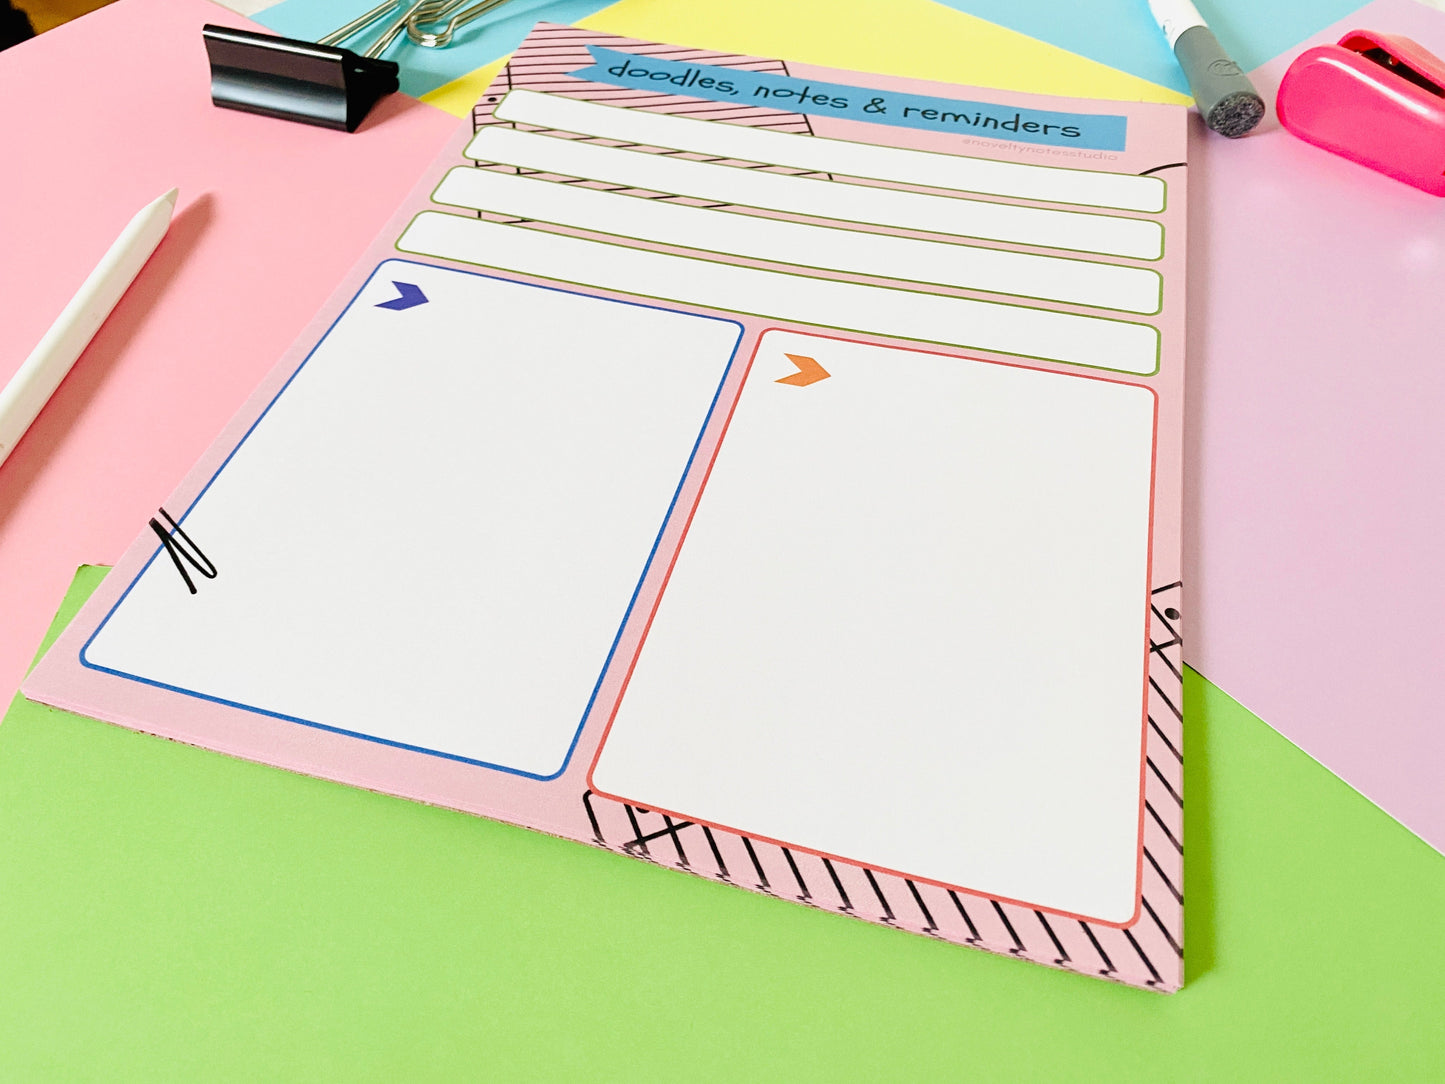 Doodles Notes Reminders Pastel Stationery Notepad Notebooks & Notepads Pink Sweetheart